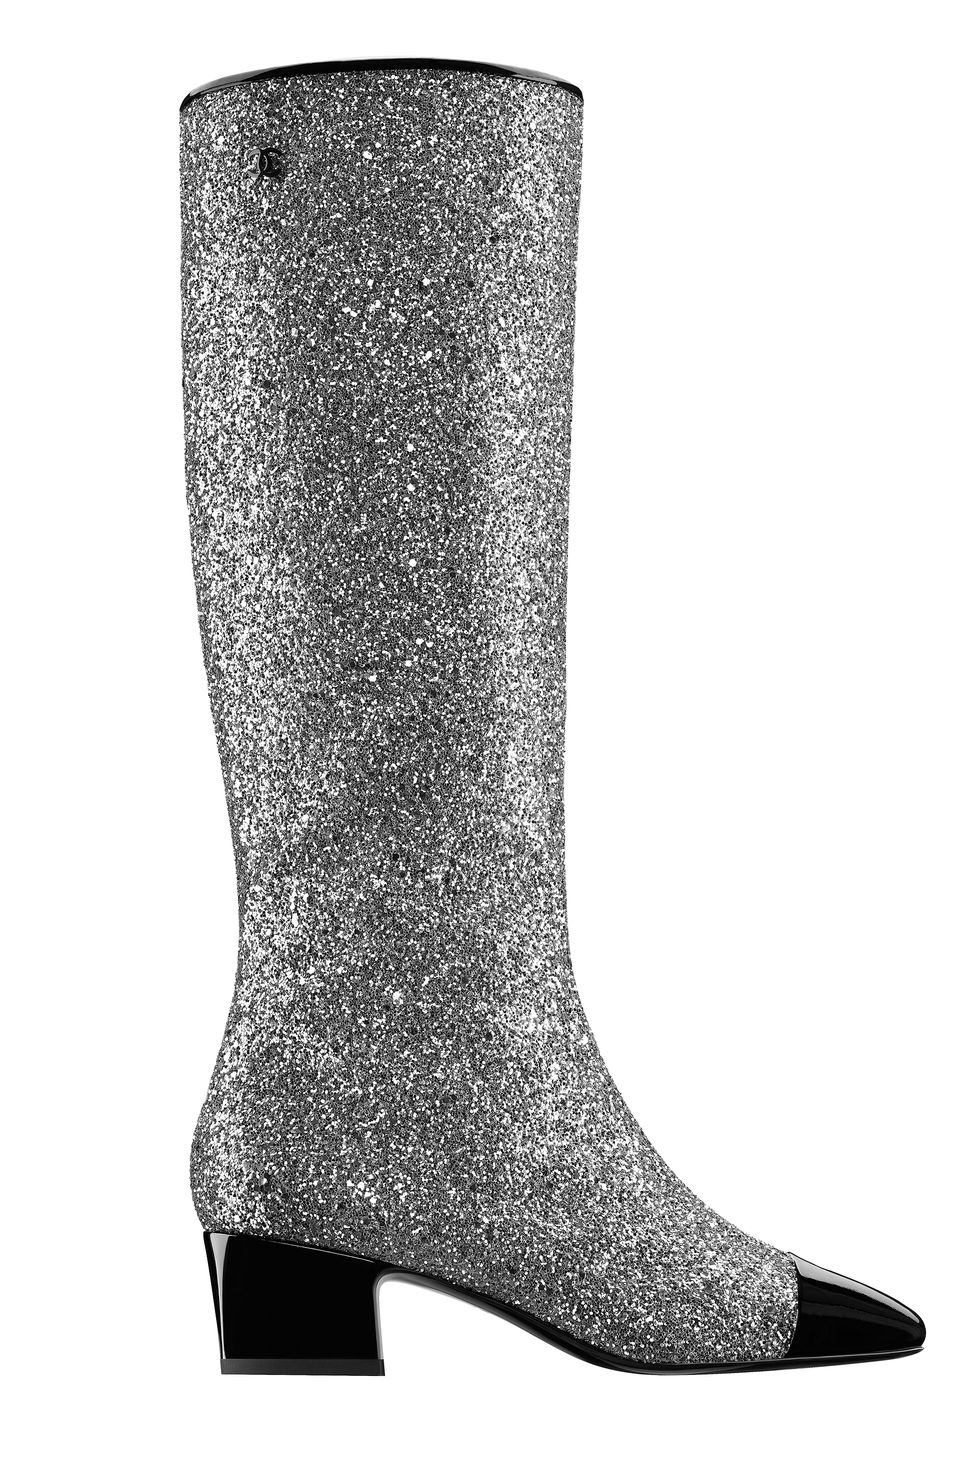 <p>De glitterende hak die geheel aansluit op de heelal trend is van Chanel.</p><p><a href="http://www.chanel.com/en_GB/fashion/products/shoes/g/s.high-boots-gliterred-fabric-patent.17K.G33220Y52302C0625.c.17K.html" target="_blank" data-tracking-id="recirc-text-link">Chanel.com</a><span class="redactor-invisible-space" data-verified="redactor" data-redactor-tag="span" data-redactor-class="redactor-invisible-space">,&nbsp;</span>€&nbsp;1400<span class="redactor-invisible-space" data-verified="redactor" data-redactor-tag="span" data-redactor-class="redactor-invisible-space"></span>,-<span class="redactor-invisible-space" data-verified="redactor" data-redactor-tag="span" data-redactor-class="redactor-invisible-space"></span></p>